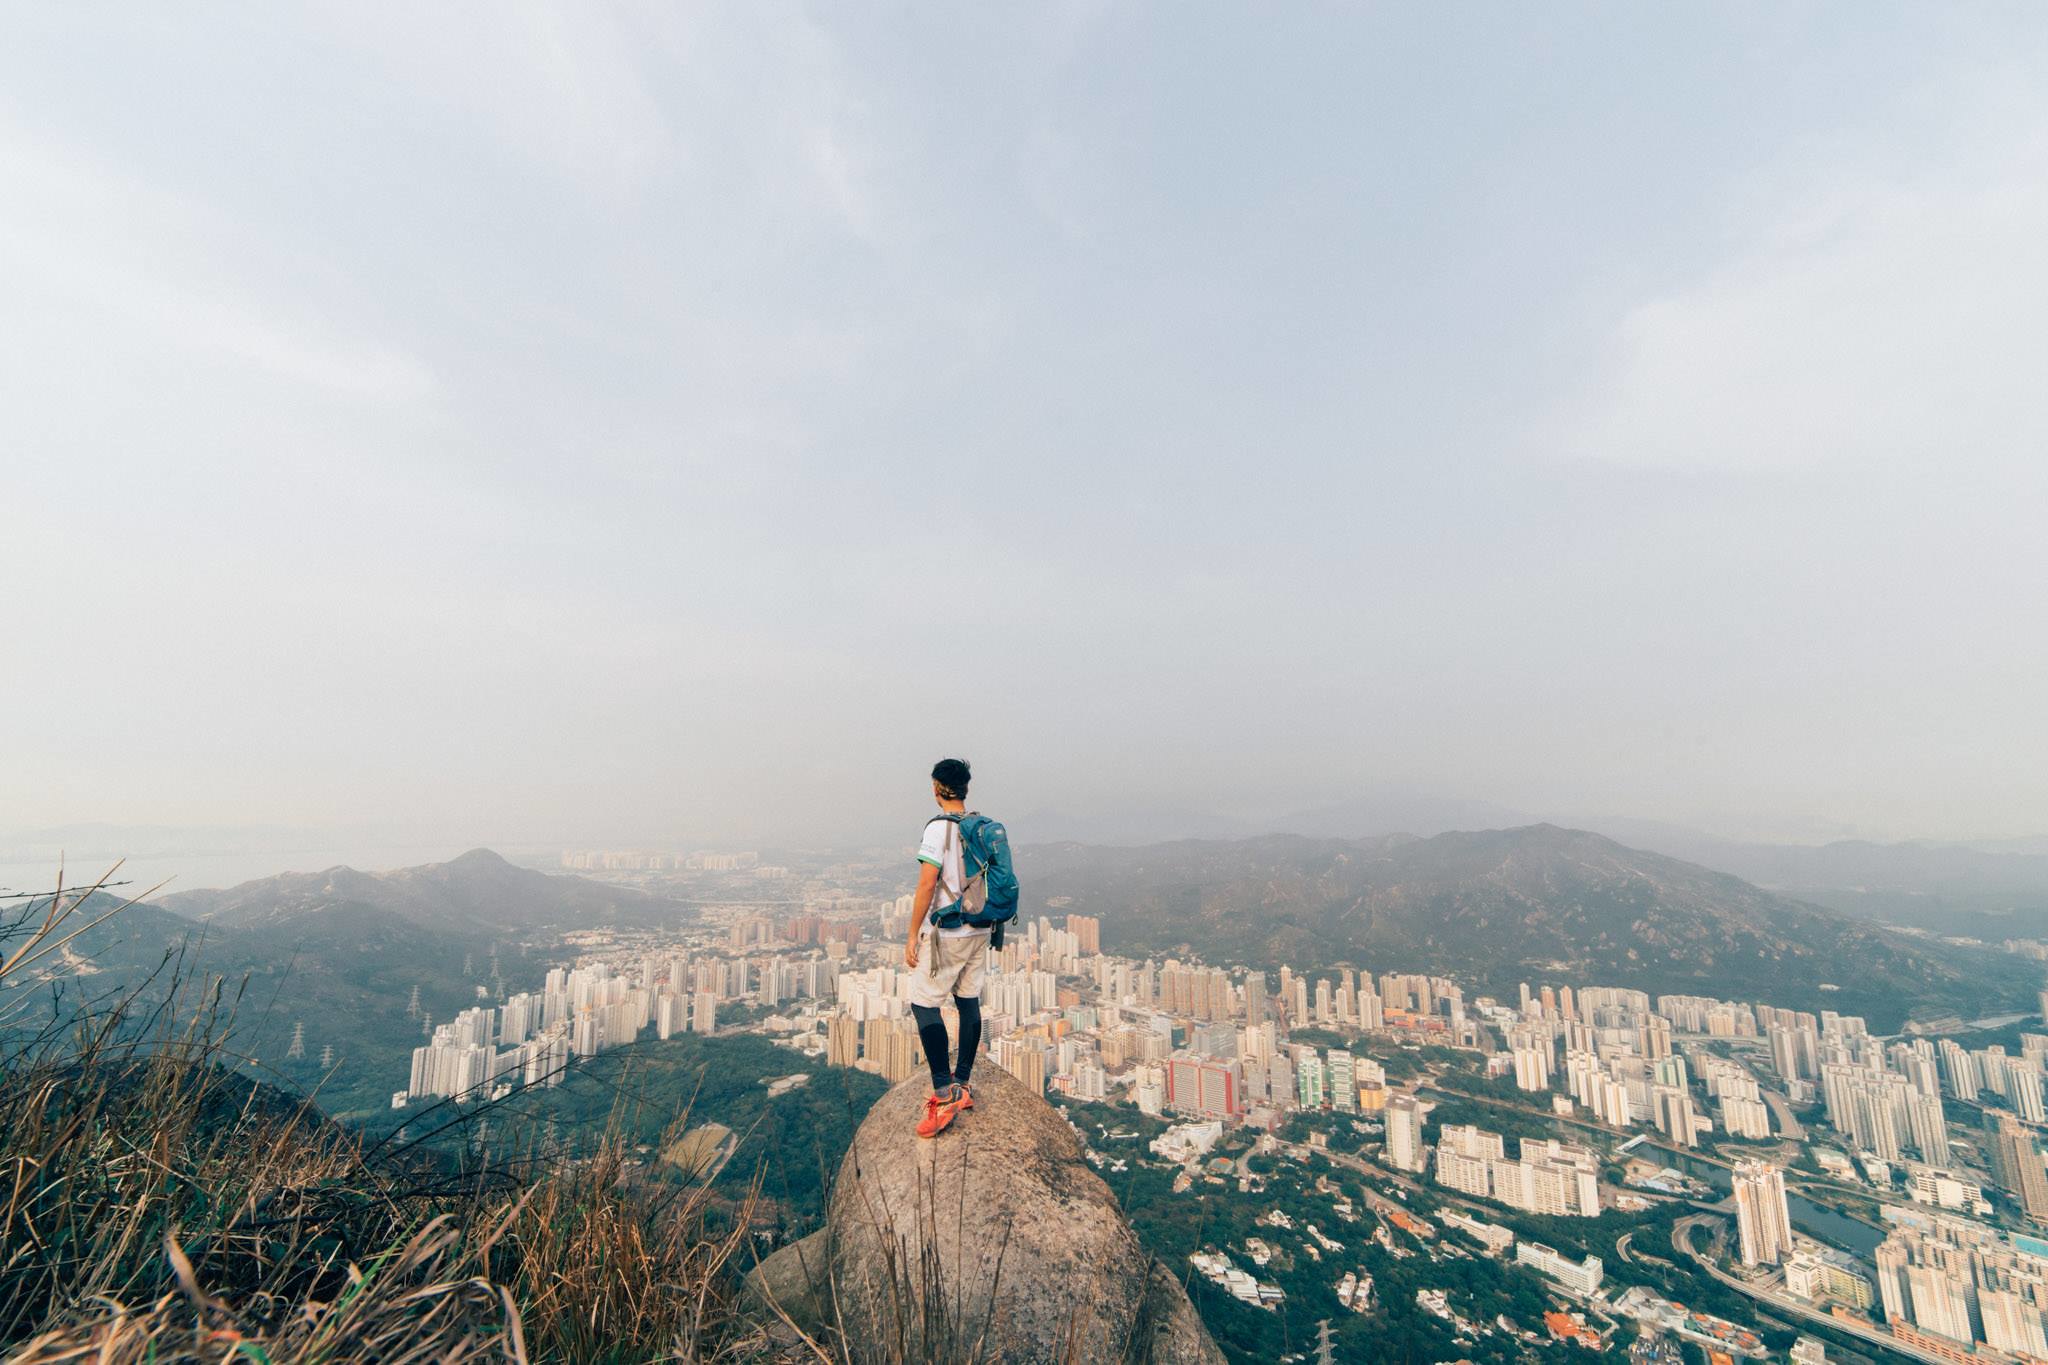 A hiker at Castle Peak in Tuen Mun, Hong Kong. Photo via Flickr/Solo Wing